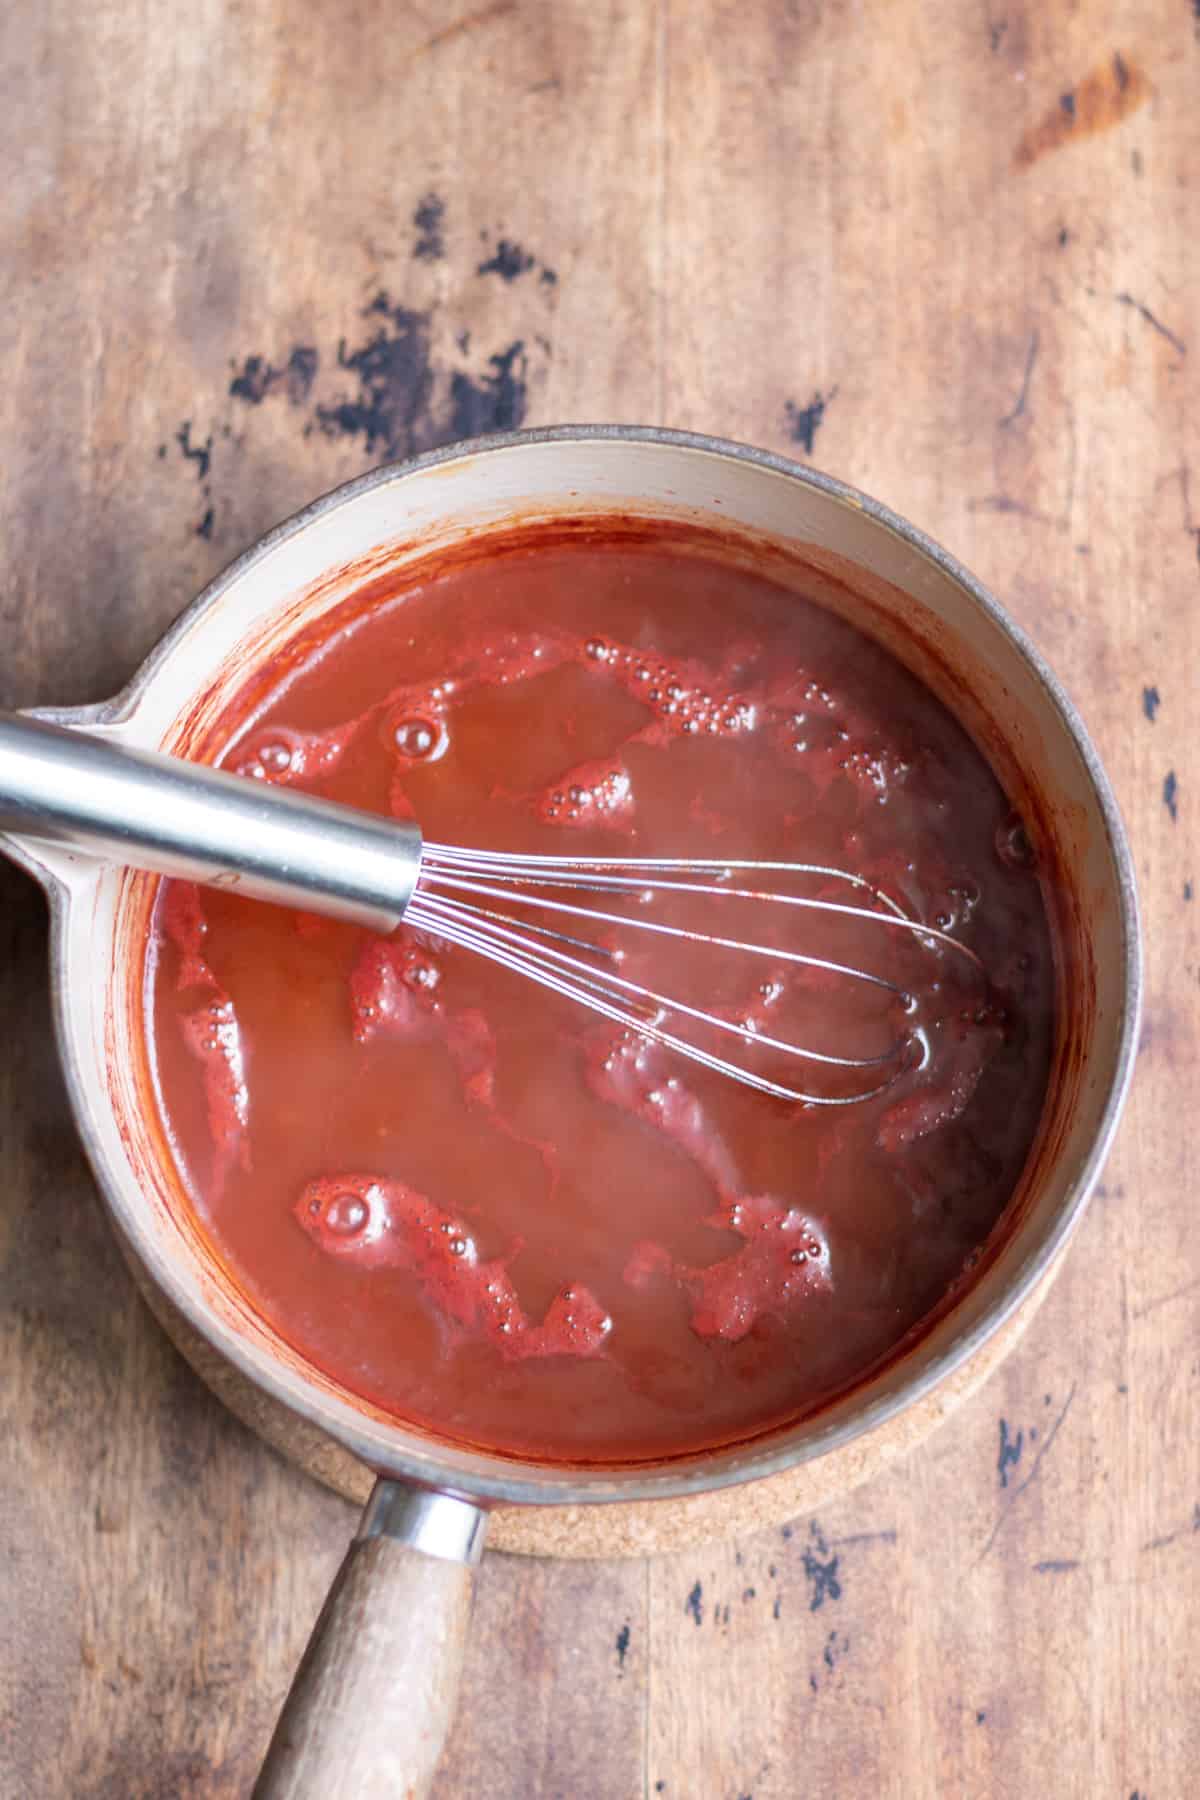 Whisking the hot sauce.